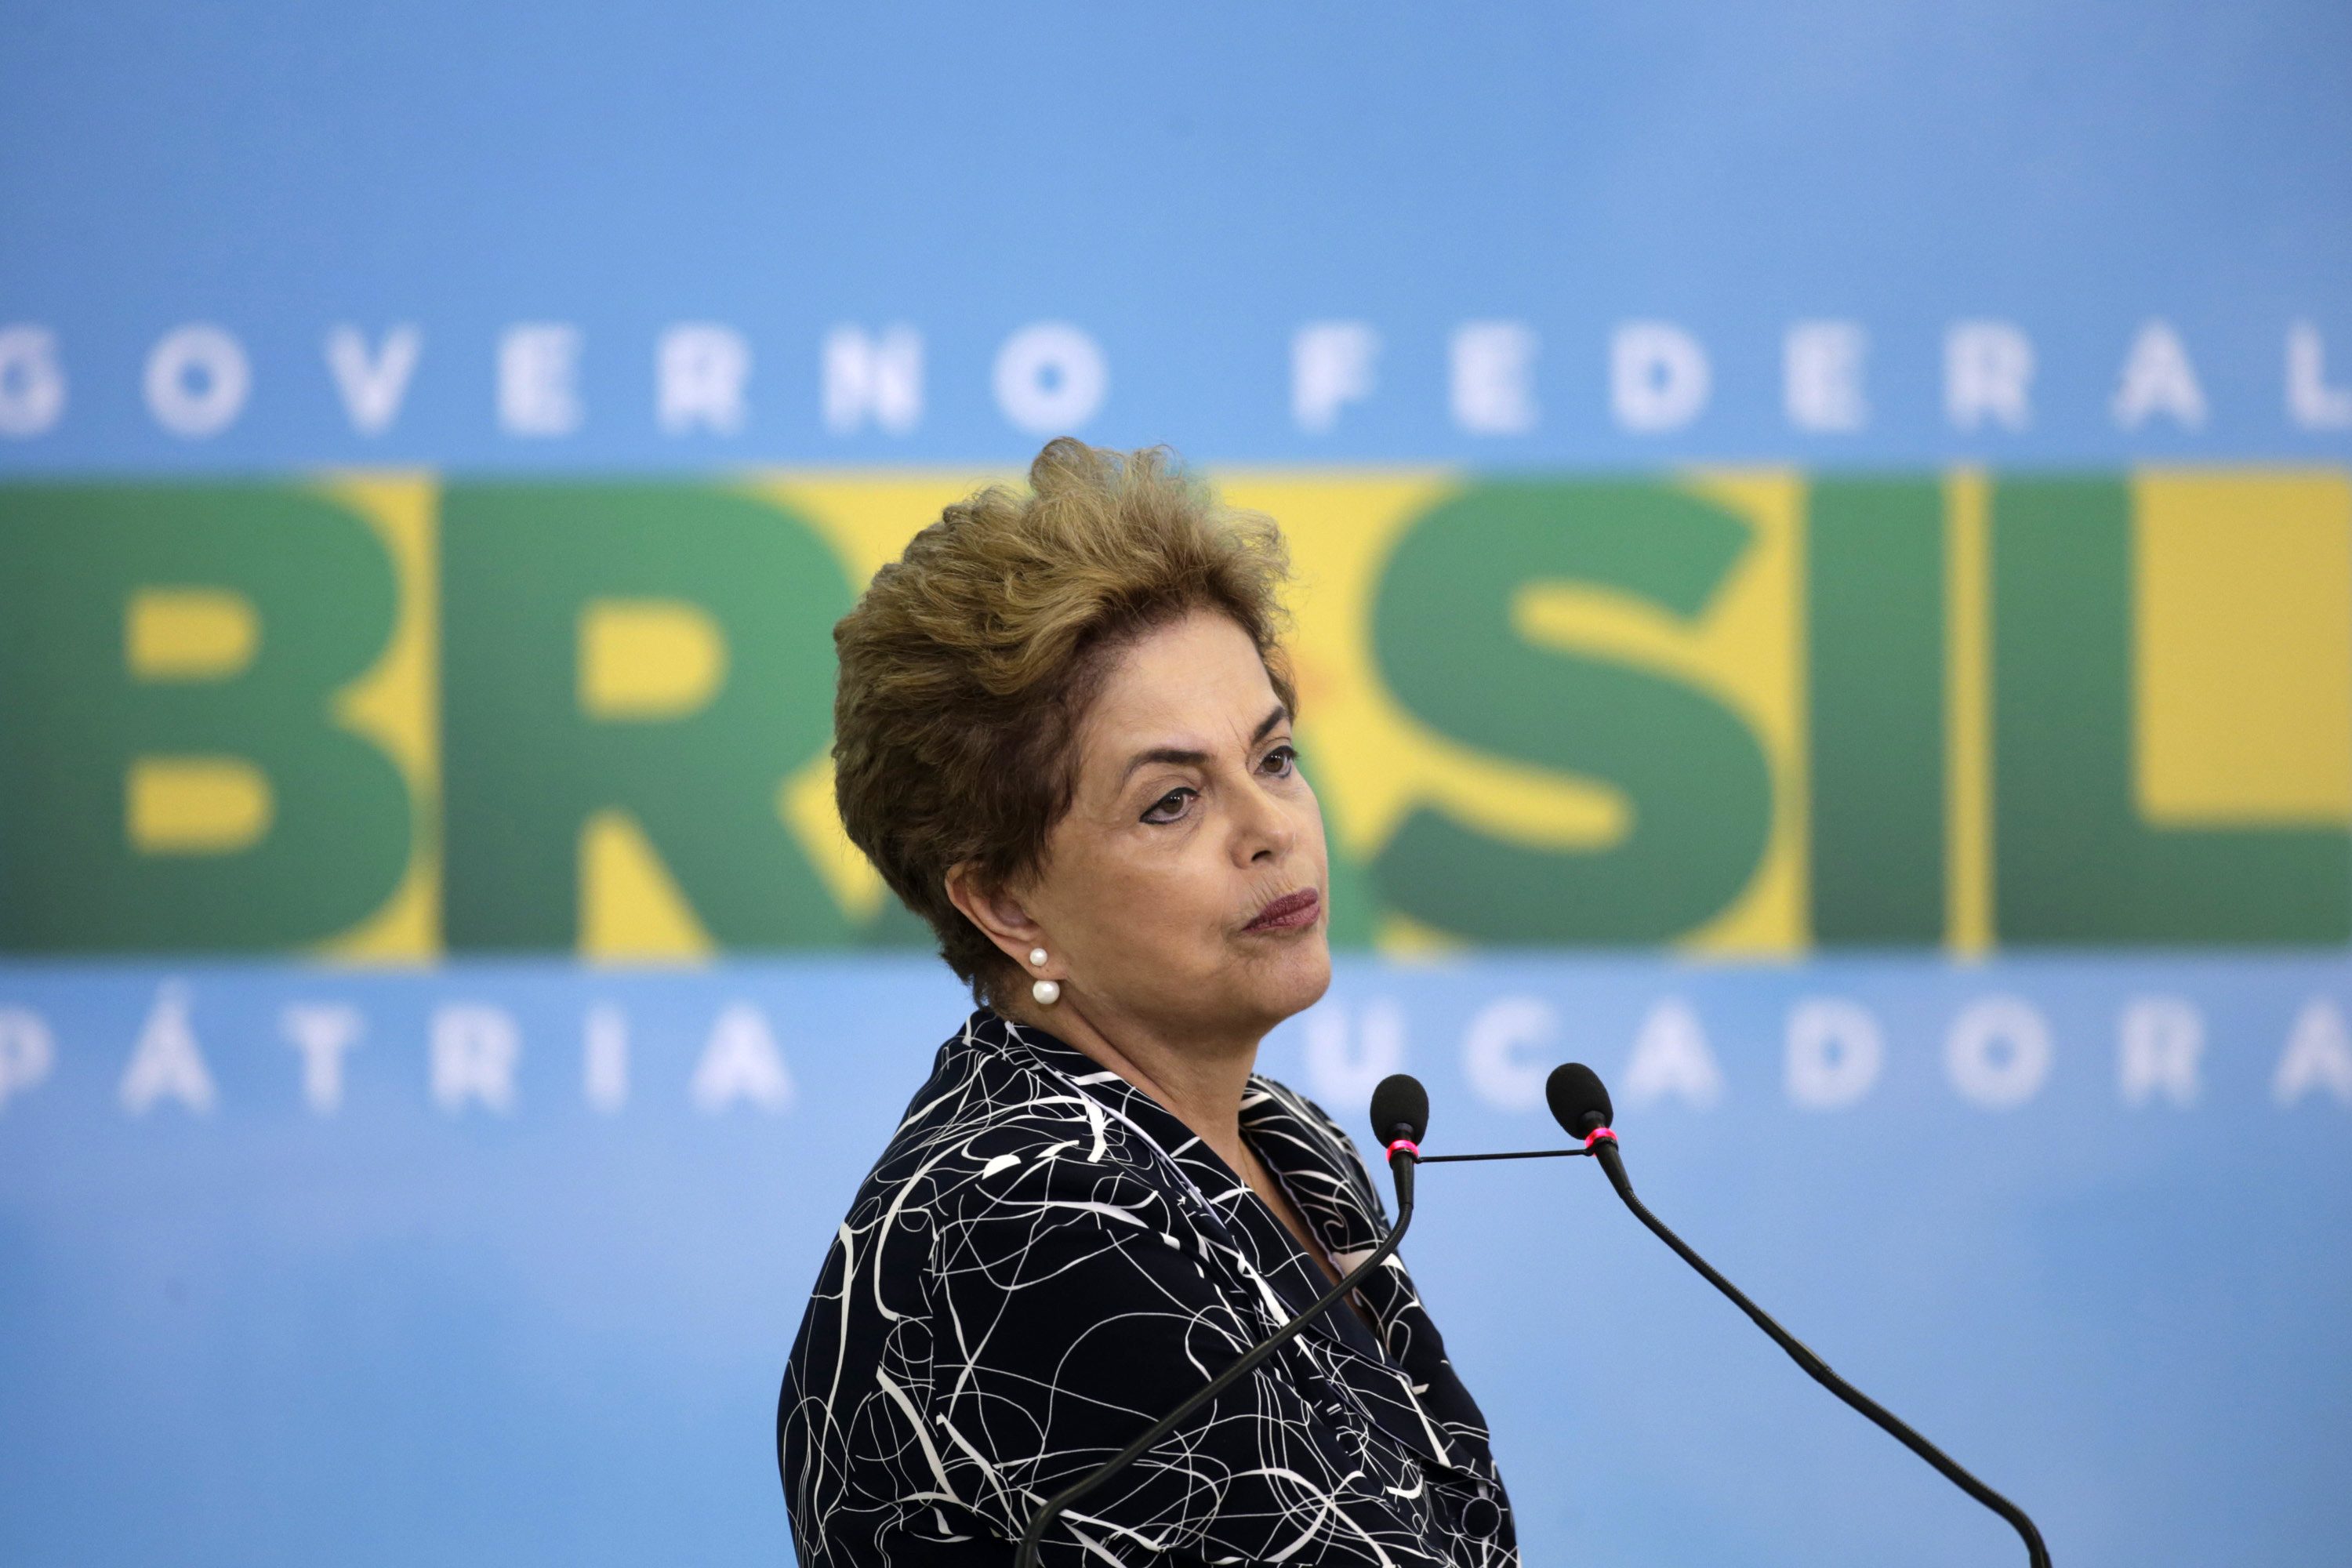 EMBATTLED LEADER. Brazilian President Dilma Rousseff delivers a speech during a ceremony to launch a new phase of the state-funded housing program, at the Planalto Presidential Palace in Brasilia, Brazil, May 6, 2016. File photo by Fernando Bizerra Jr/EPA 